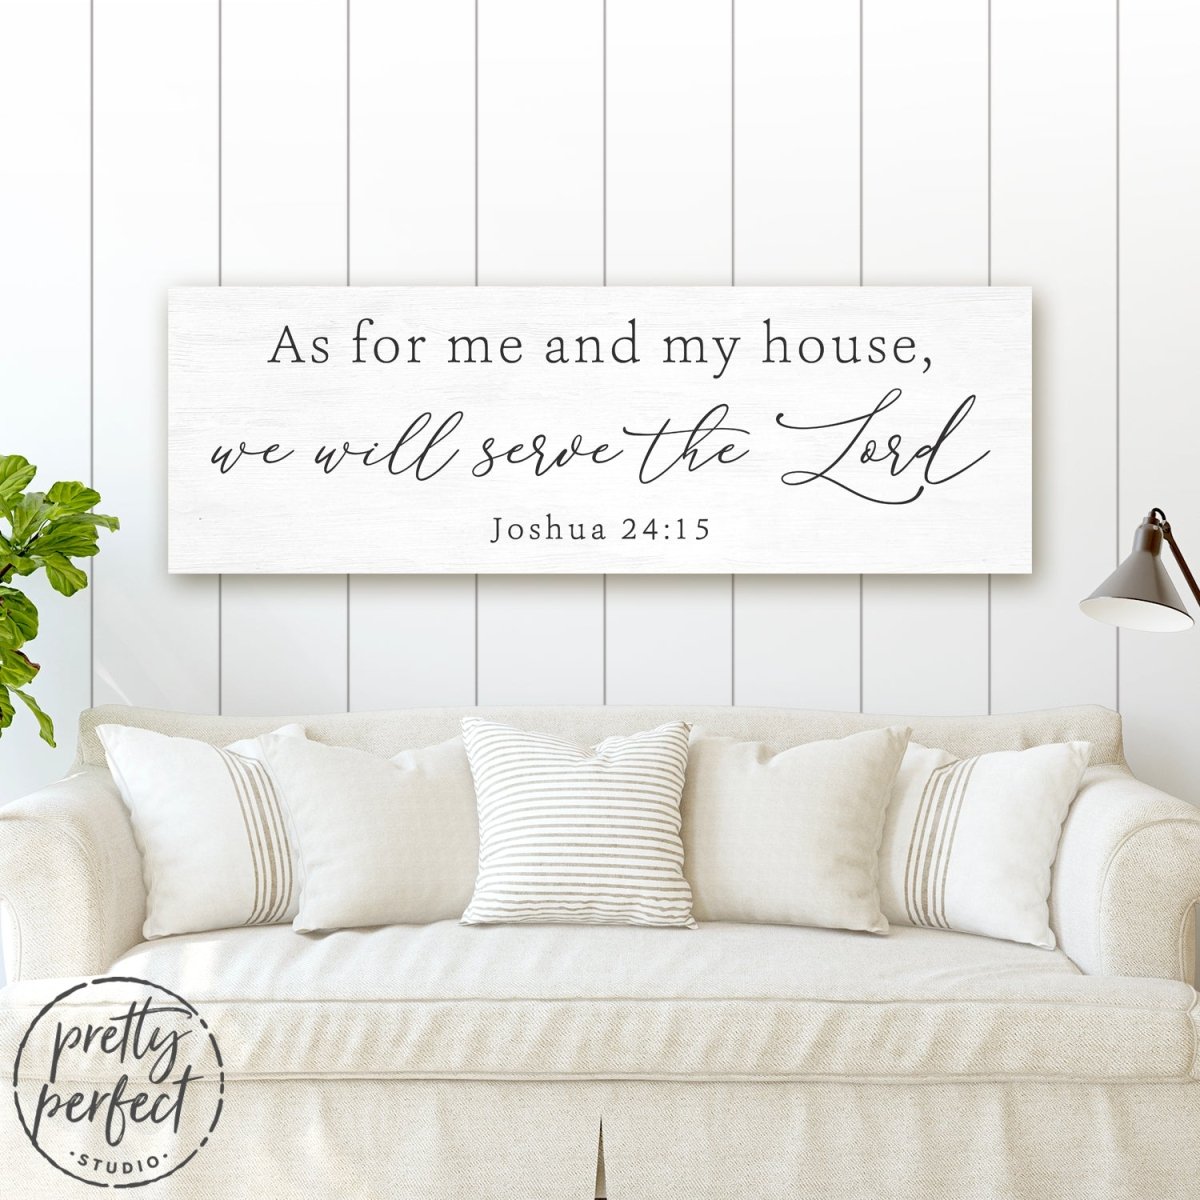 But As For Me And My House, We Will Serve The Lord Sign Above Couch in Family Room - Pretty Perfect Studio